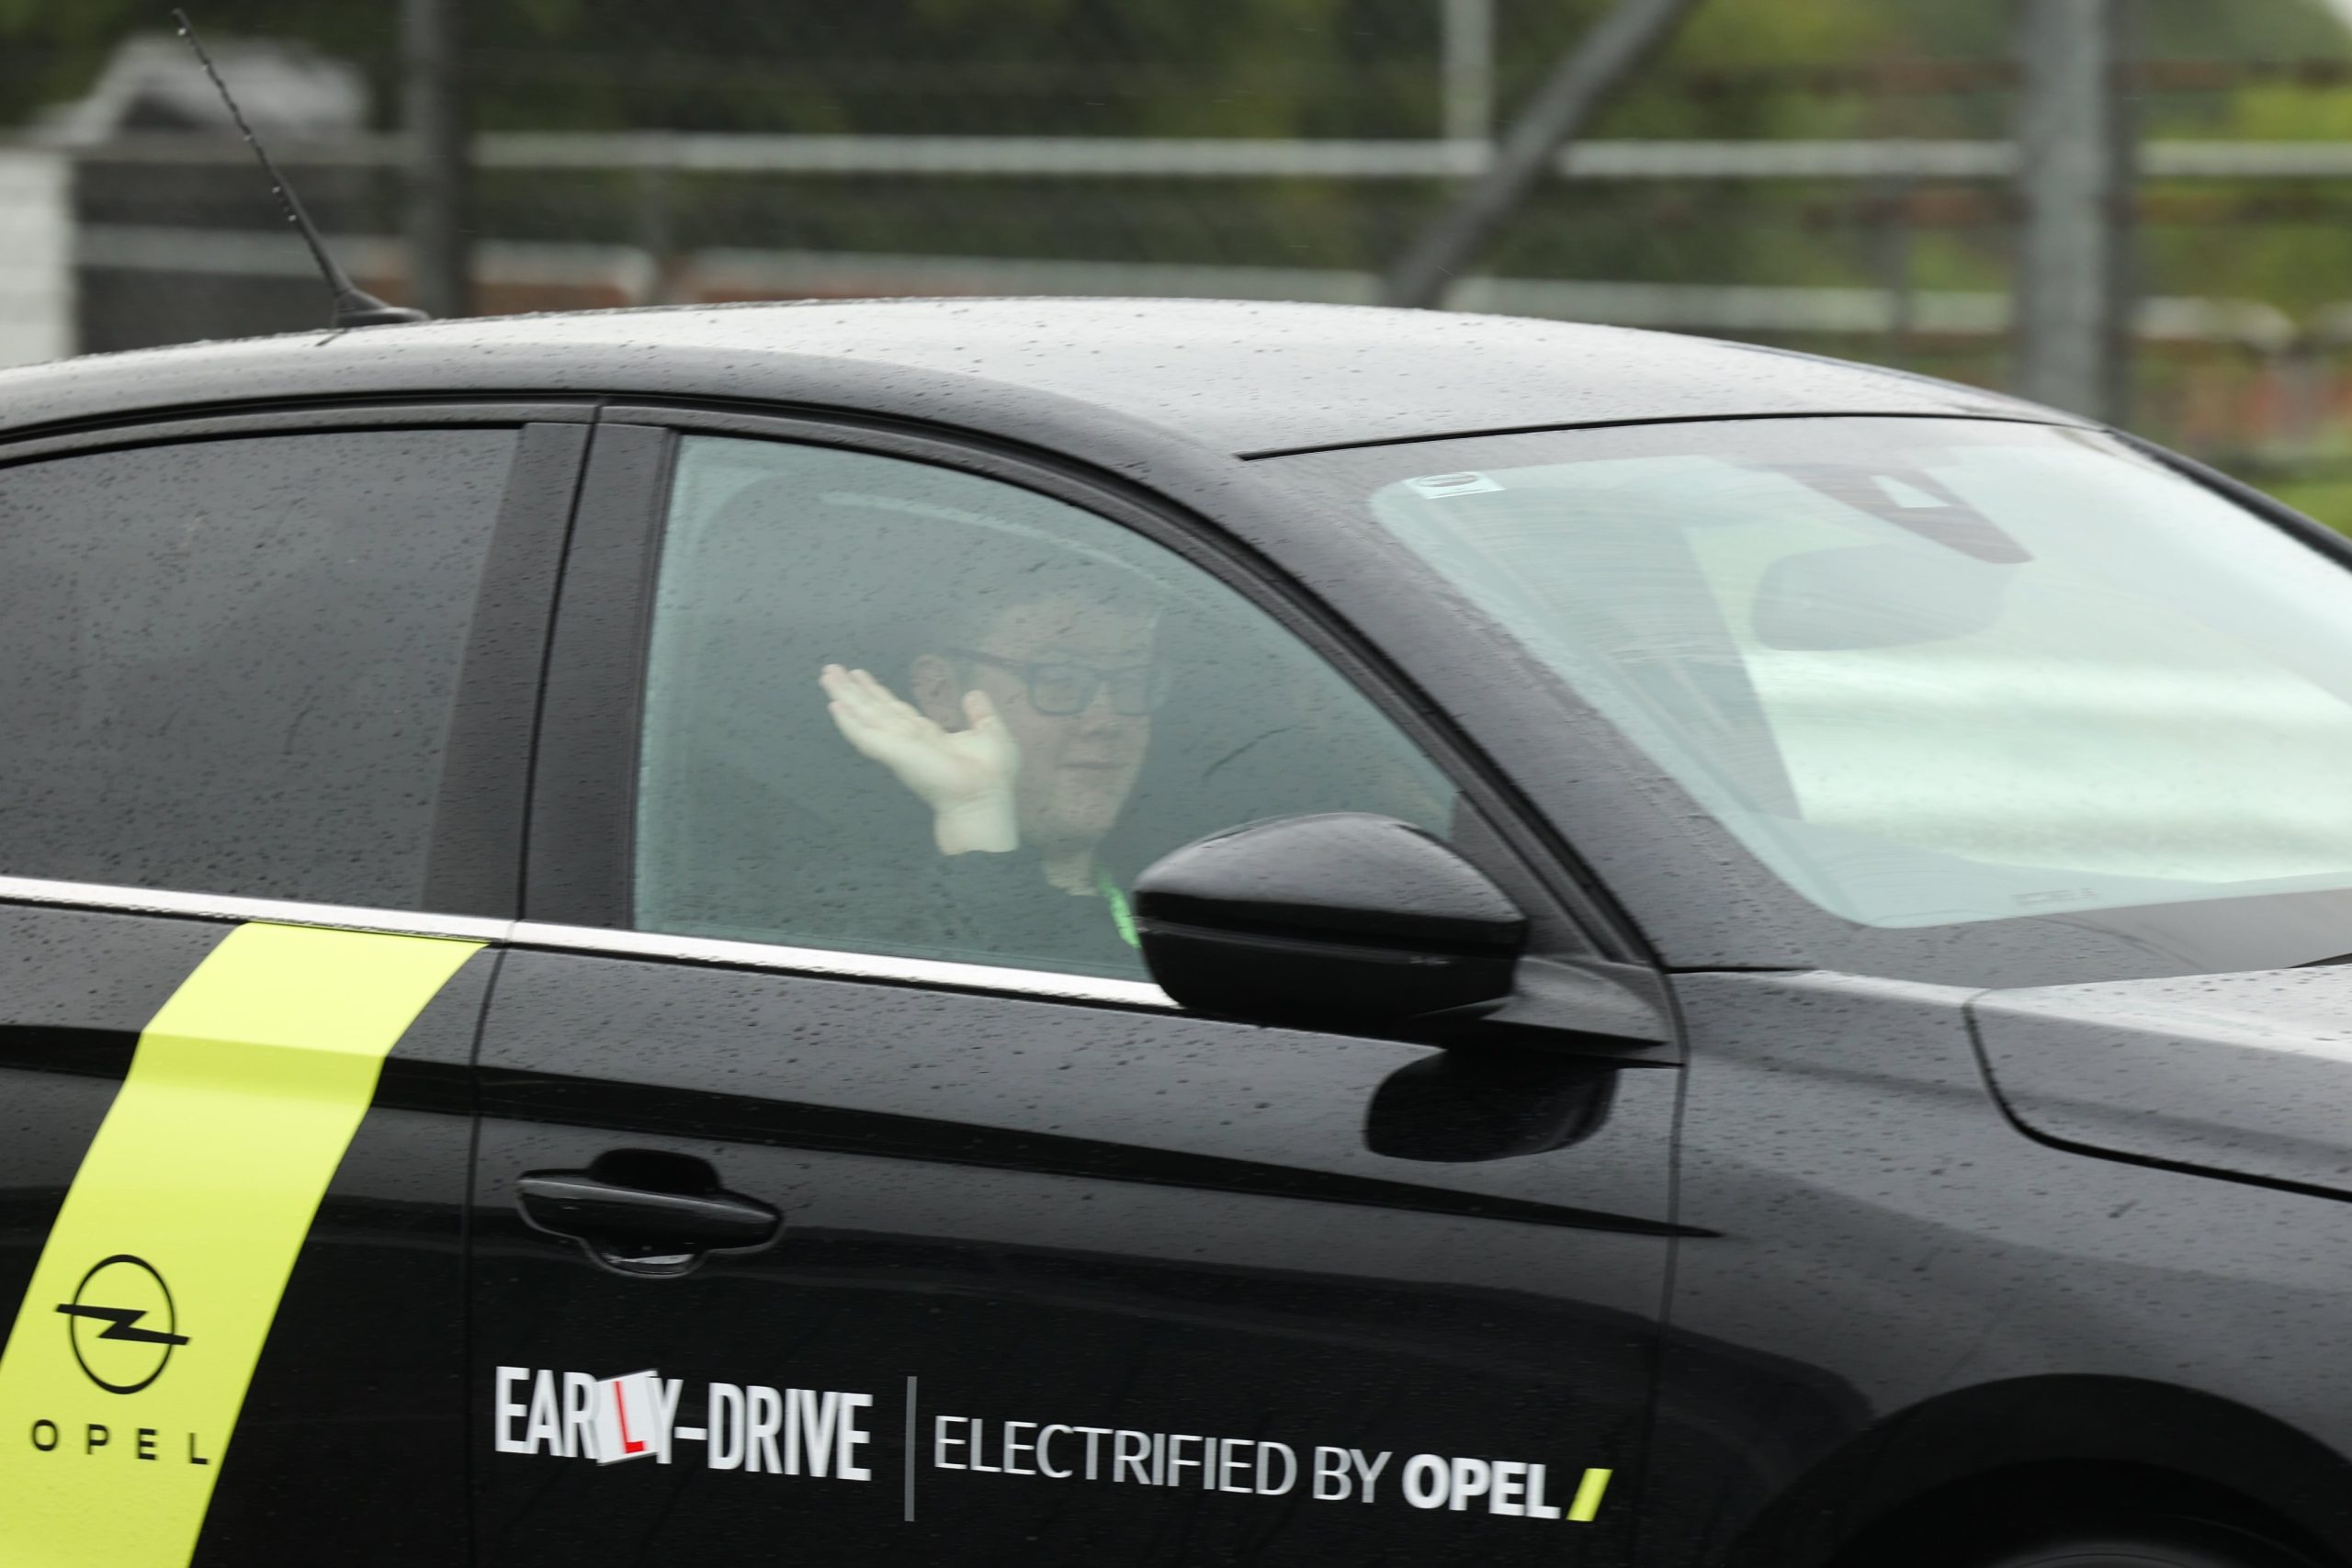 A paticipant at #ZeroLimits23 drives a black car on track while waving to the camera.